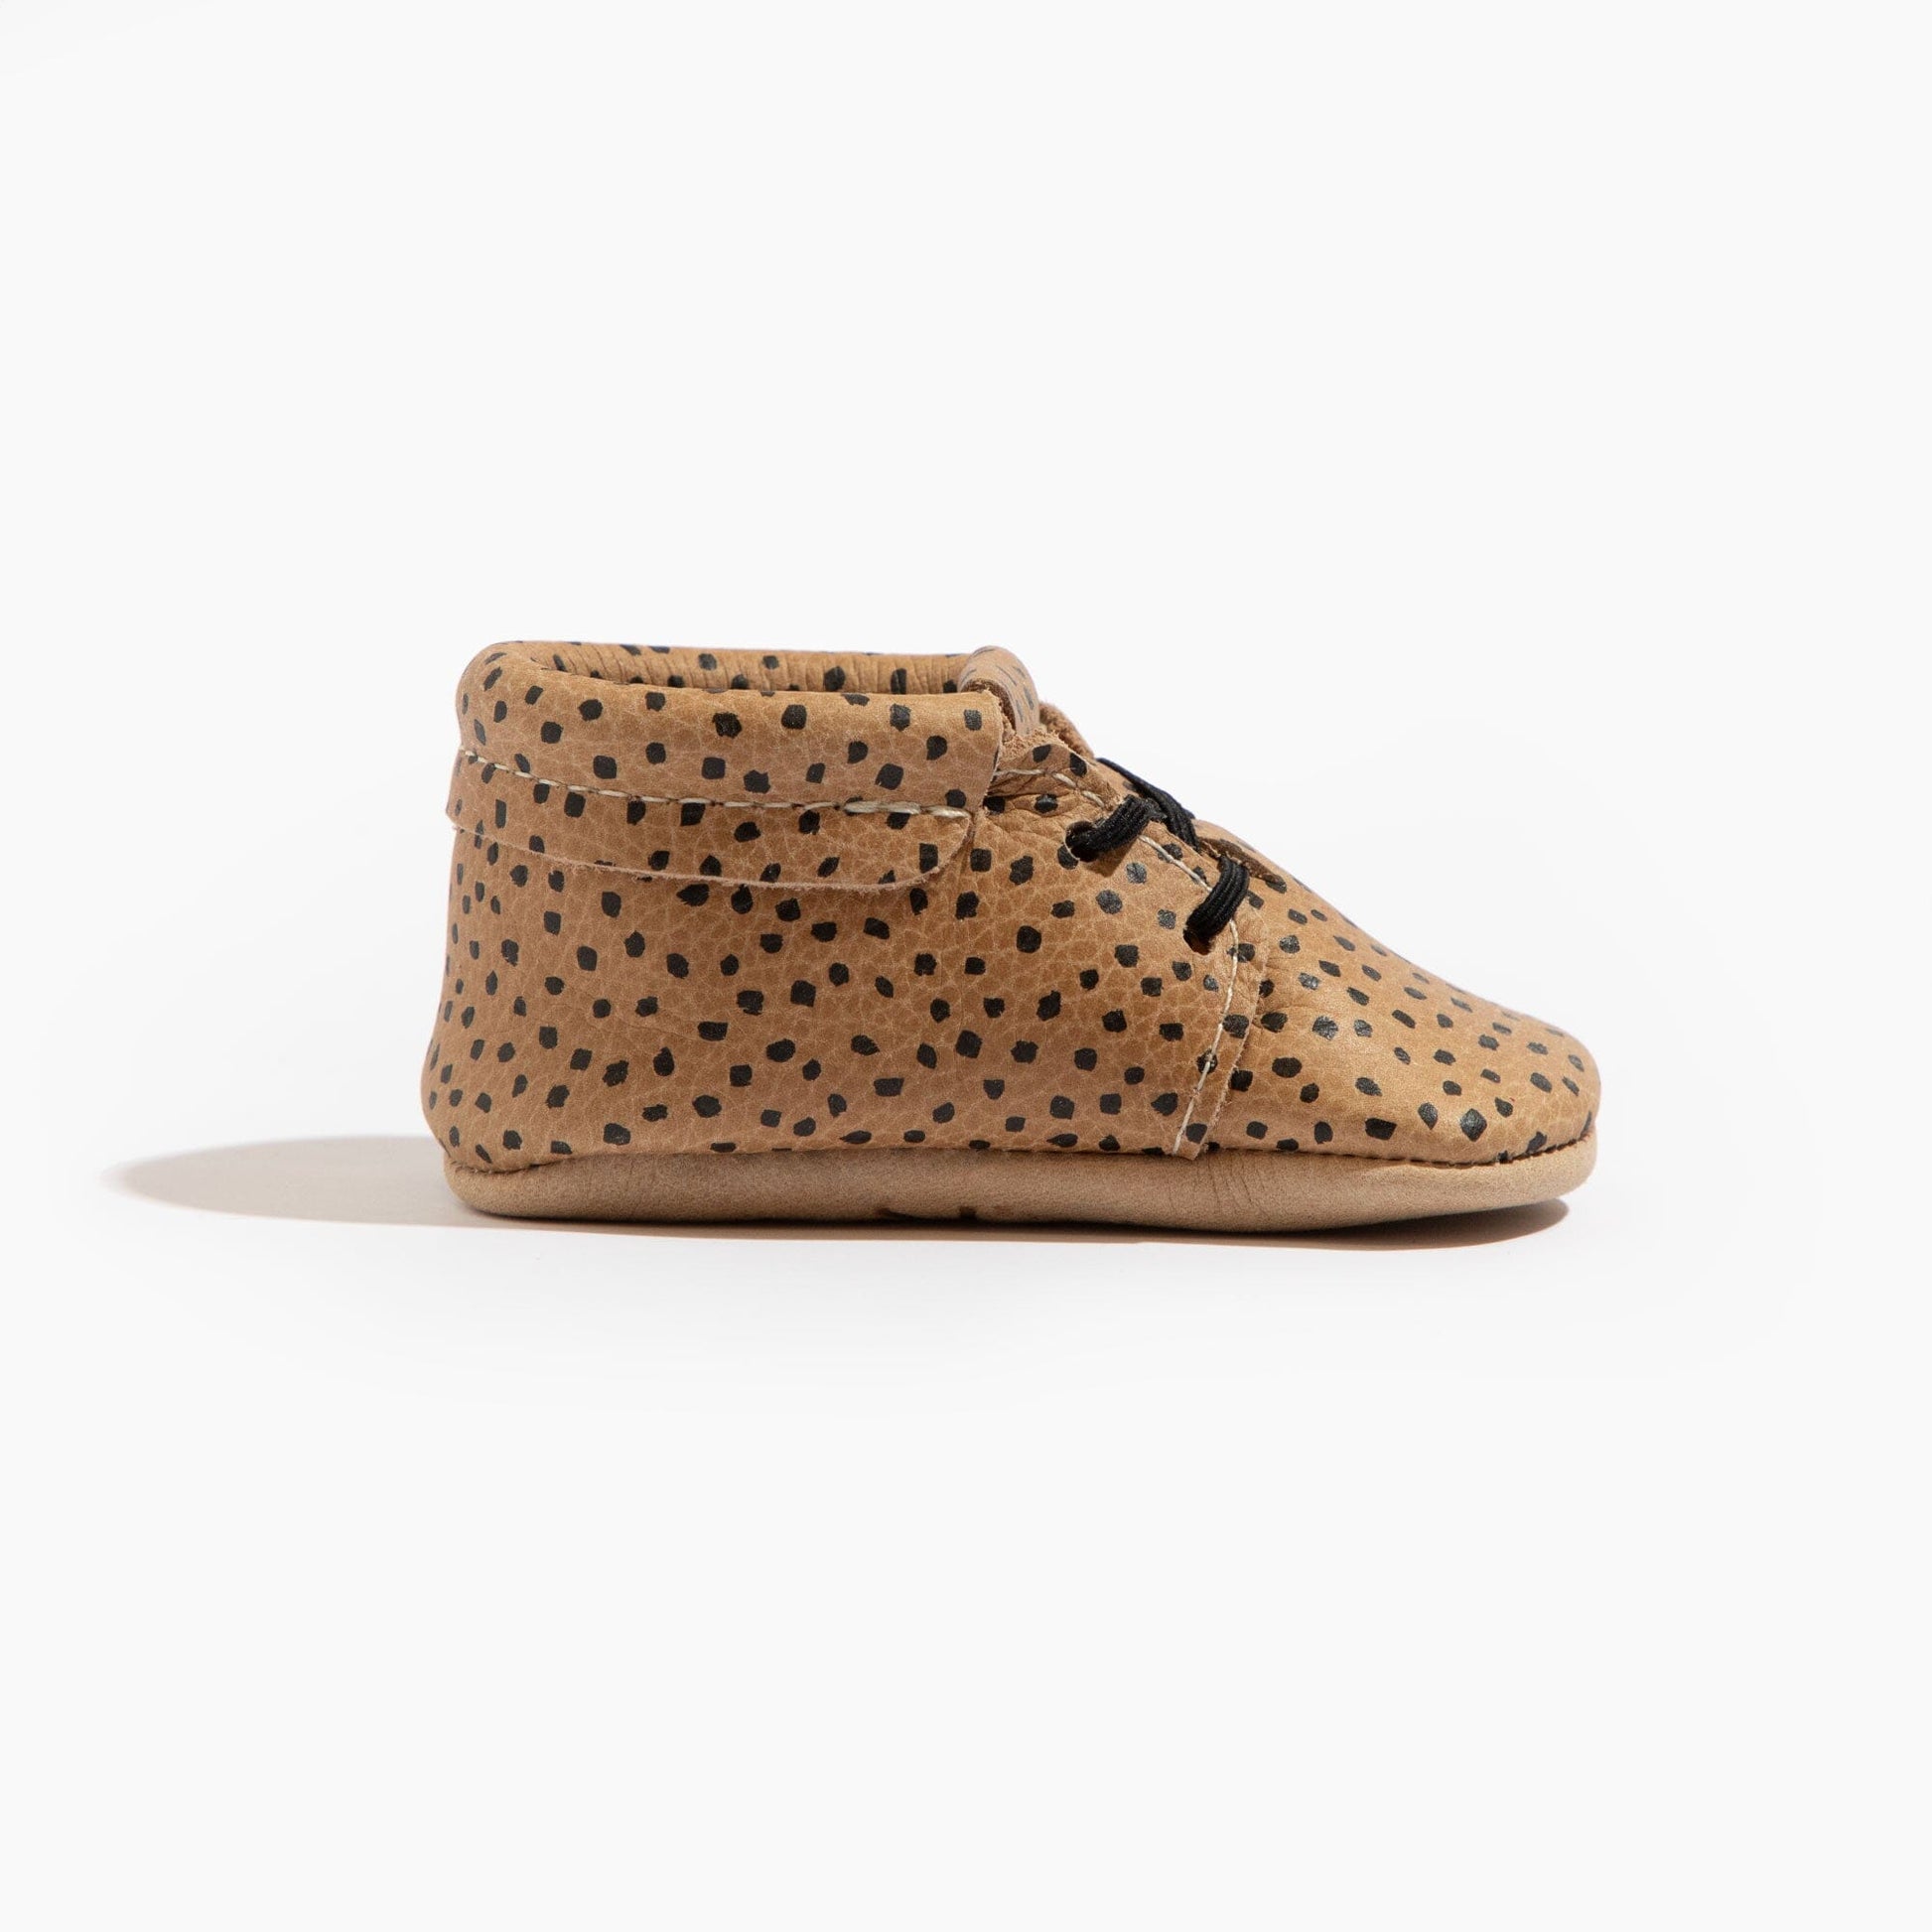 Almond Speckles Oxford Baby Shoe Oxford Soft Sole 